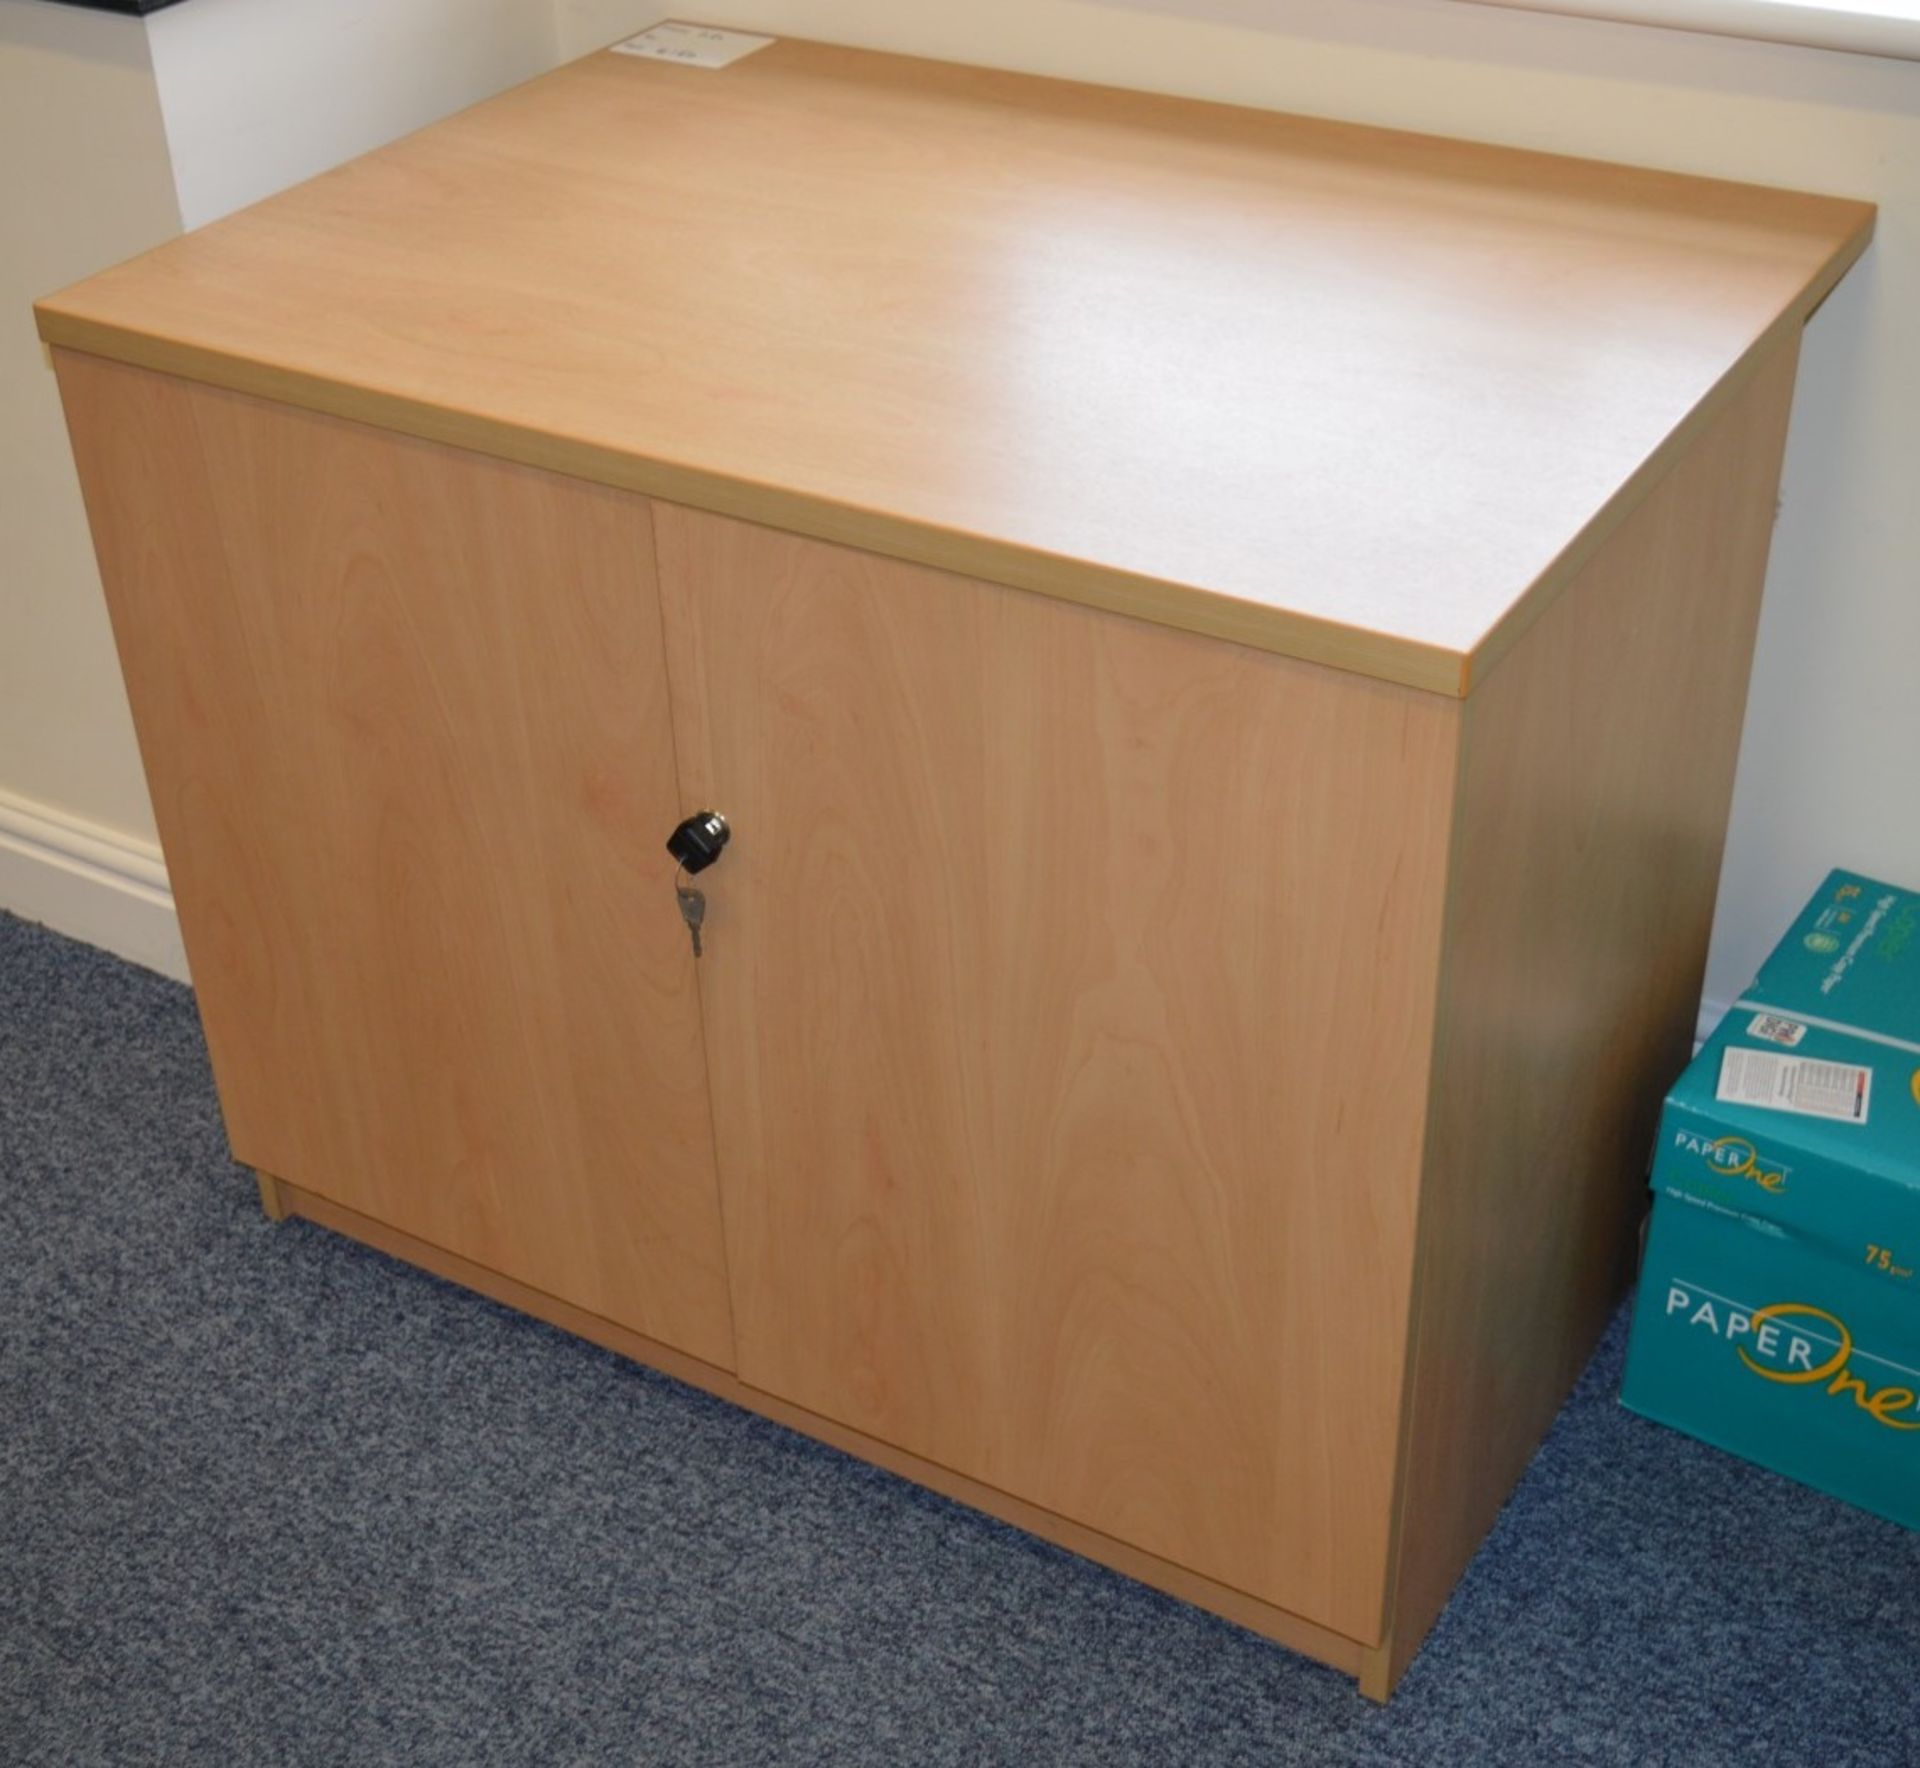 1 x Beech Office Storage Cabinet With Adjustable Internal Shelf and Key - CL300 - Ref S150 - H75 x - Image 2 of 2